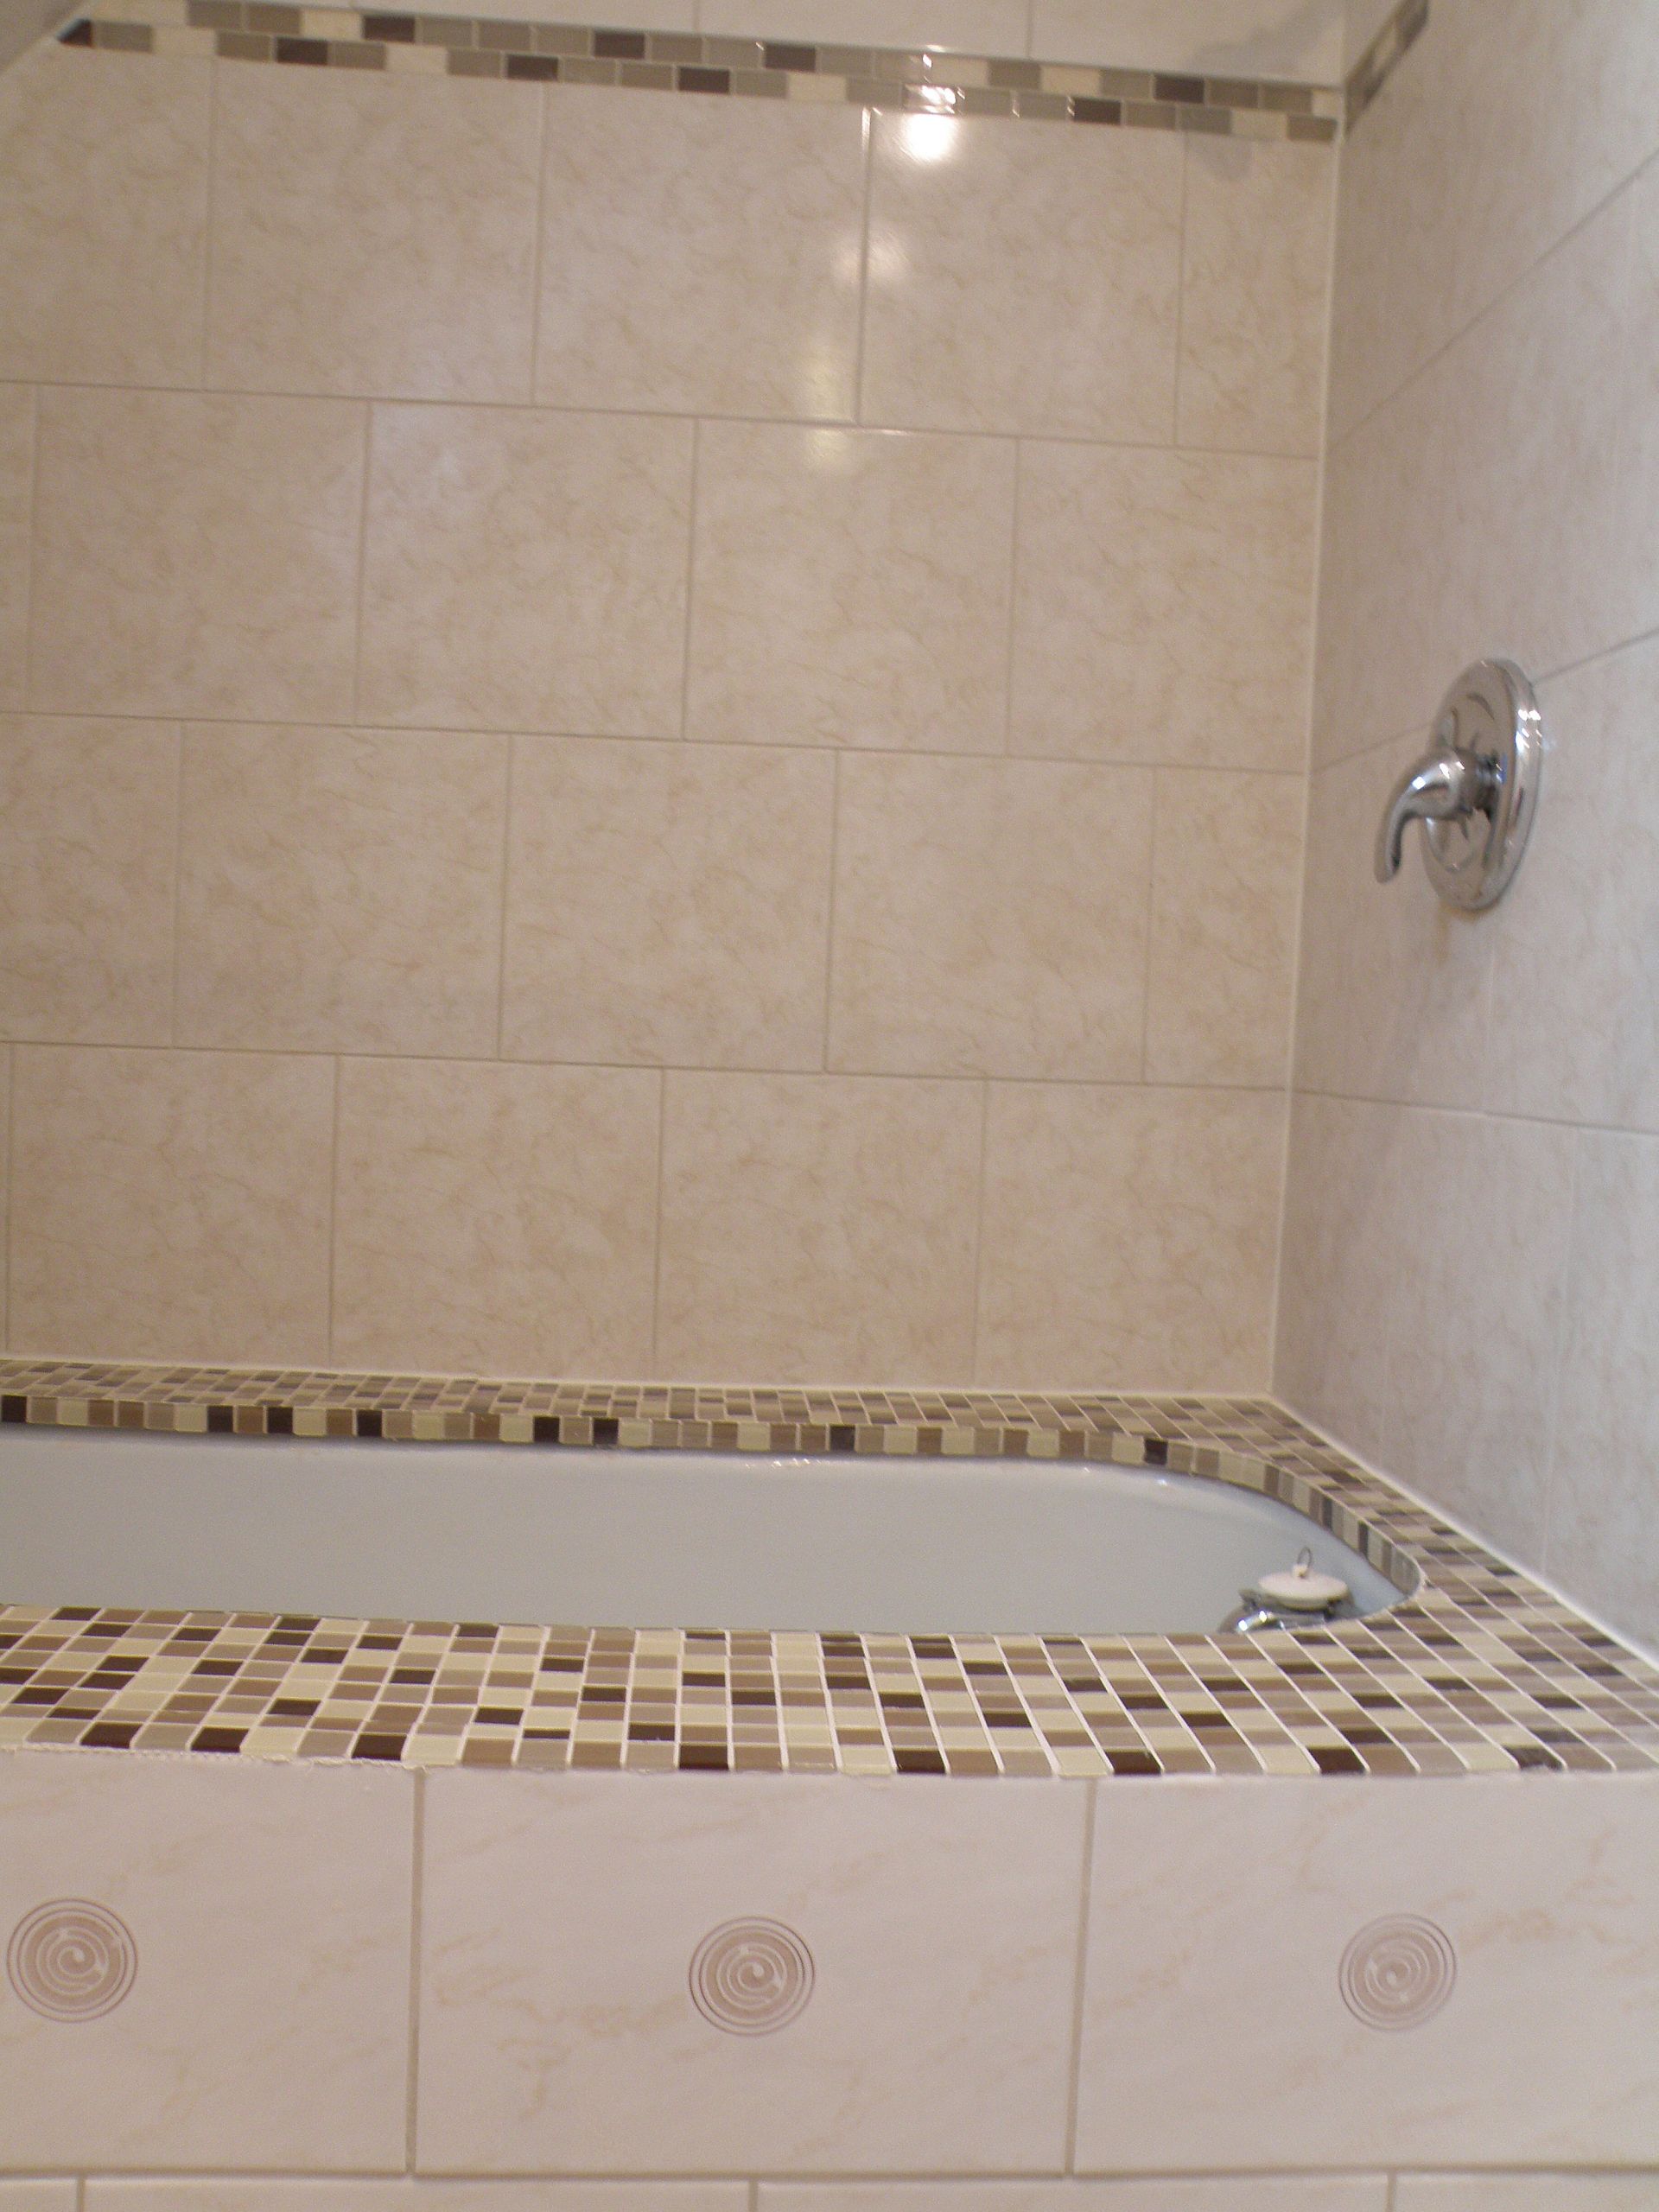 Ceramic Tile For Bathroom Showers
 Treetop Loft Apartment in Schenectady NY